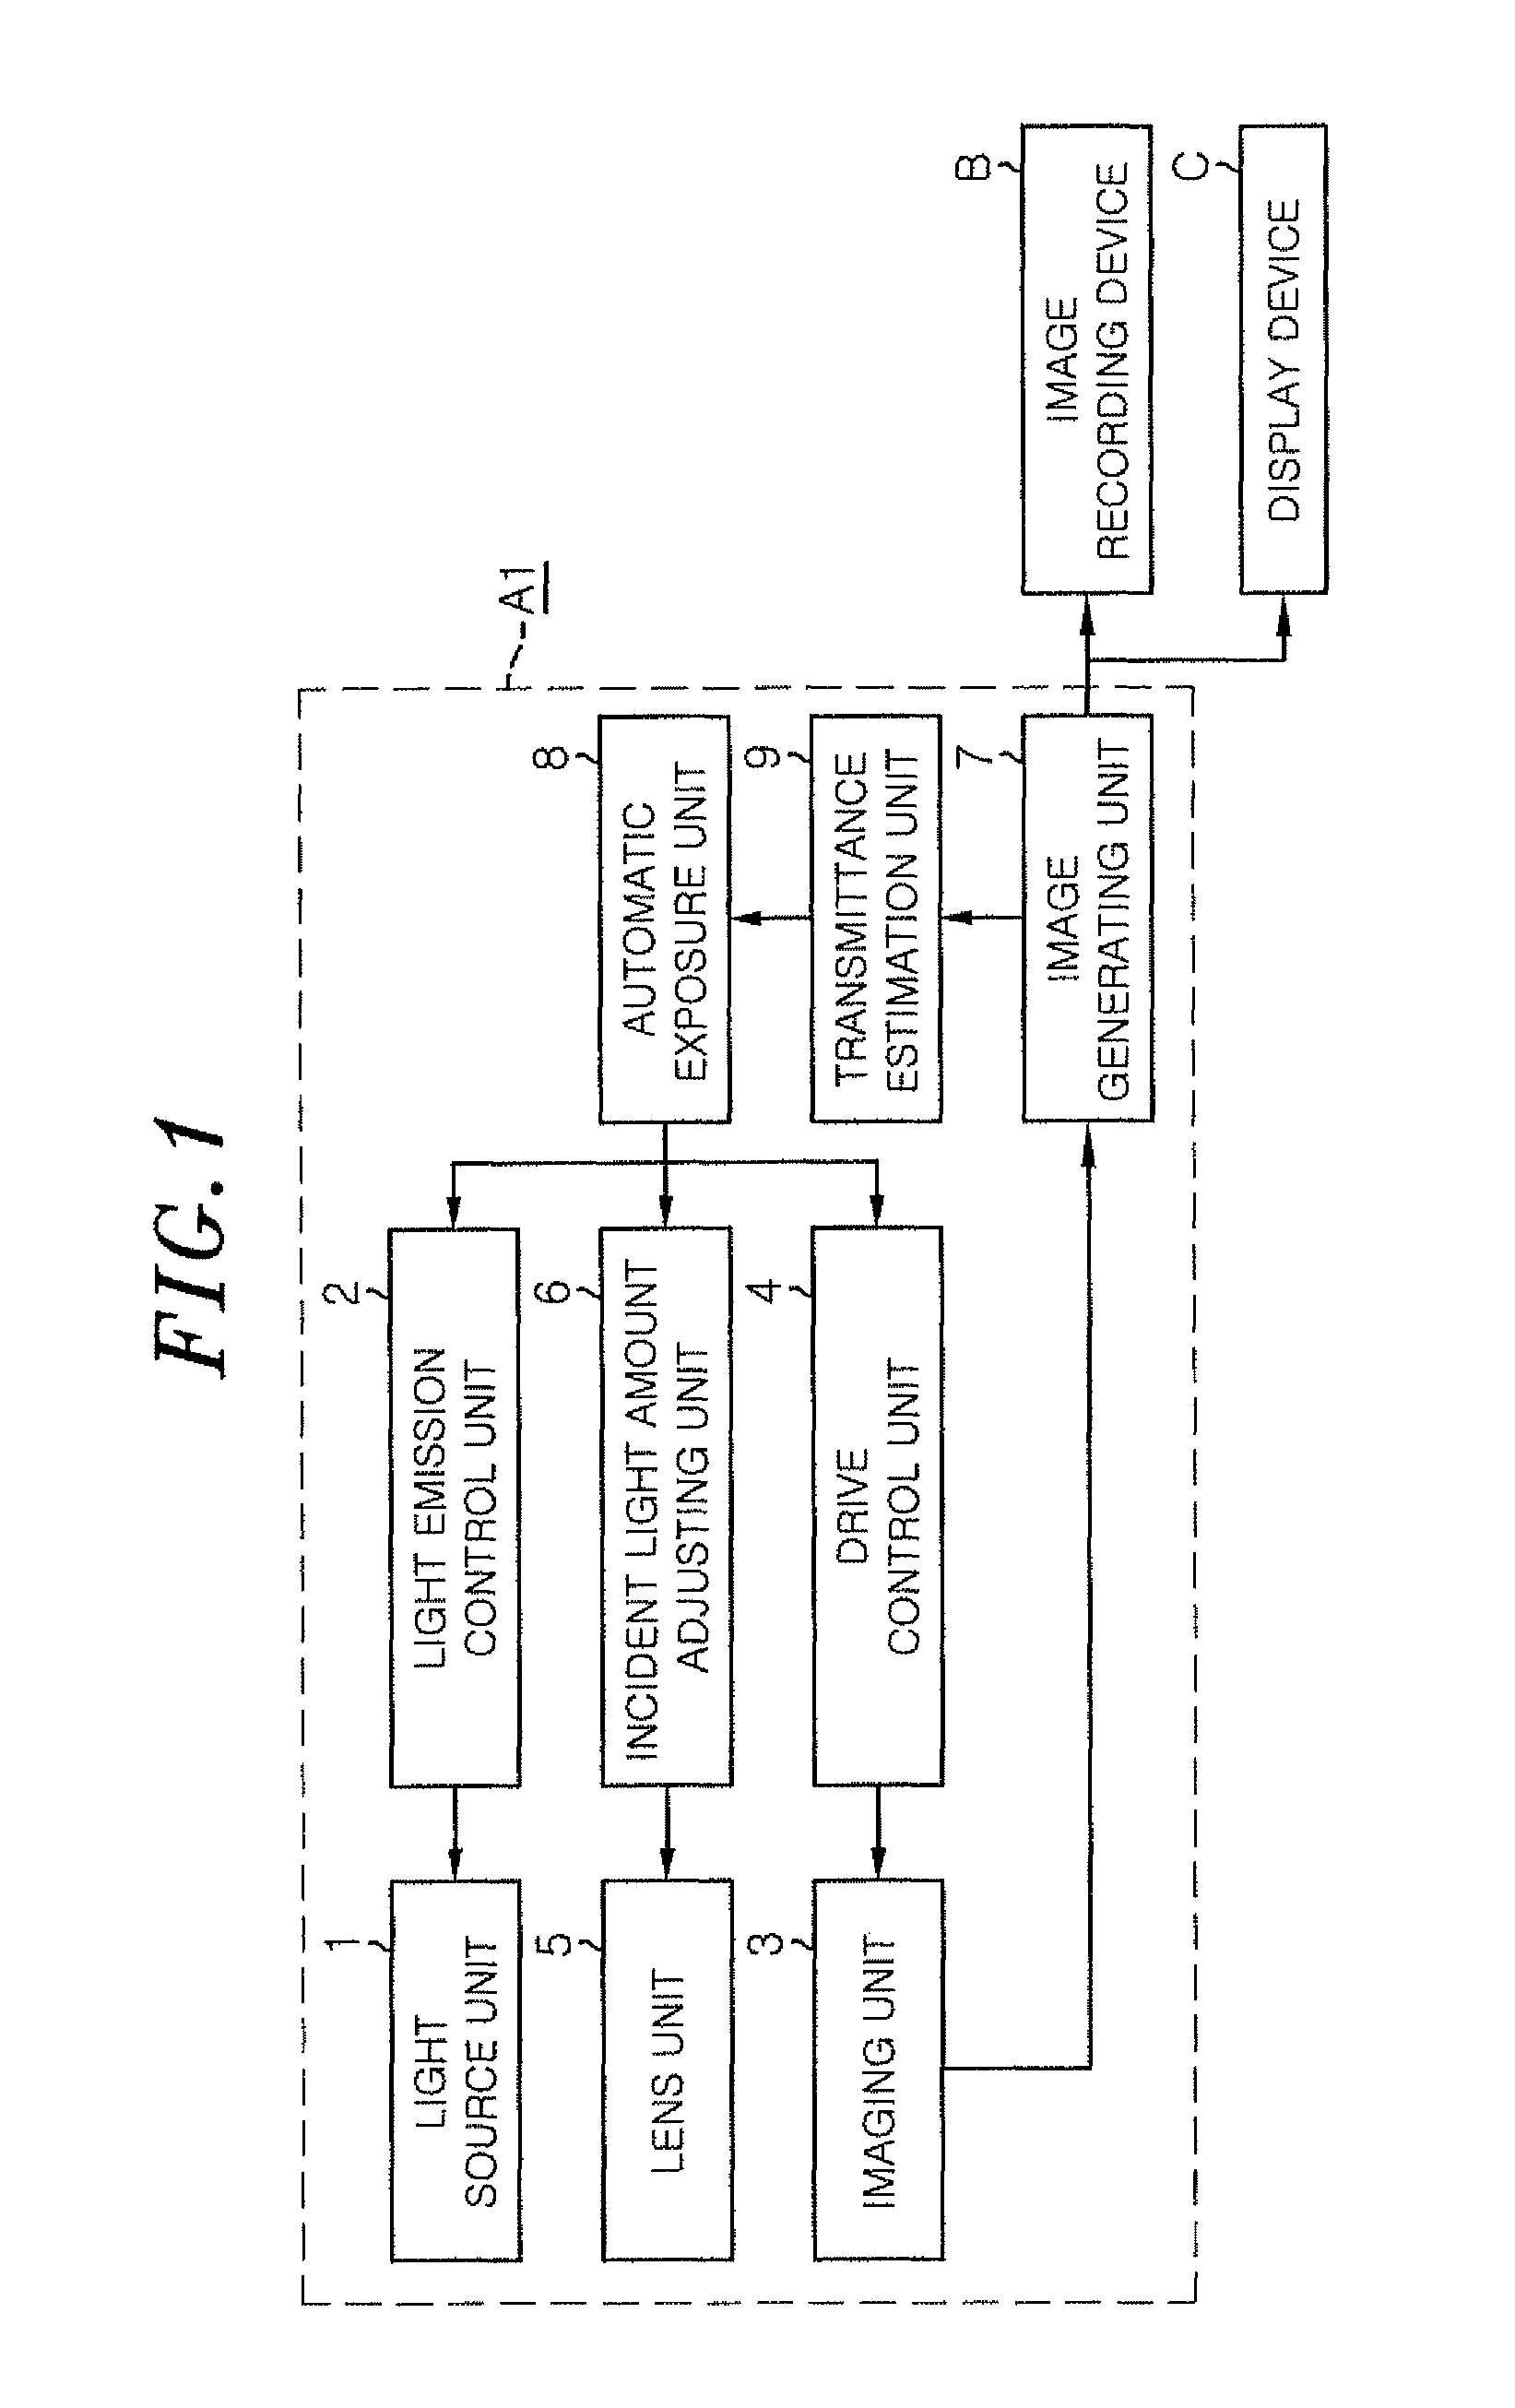 Imaging apparatus for taking a picture of a driver of a motor vehicle through a front glass of the motor vehicle